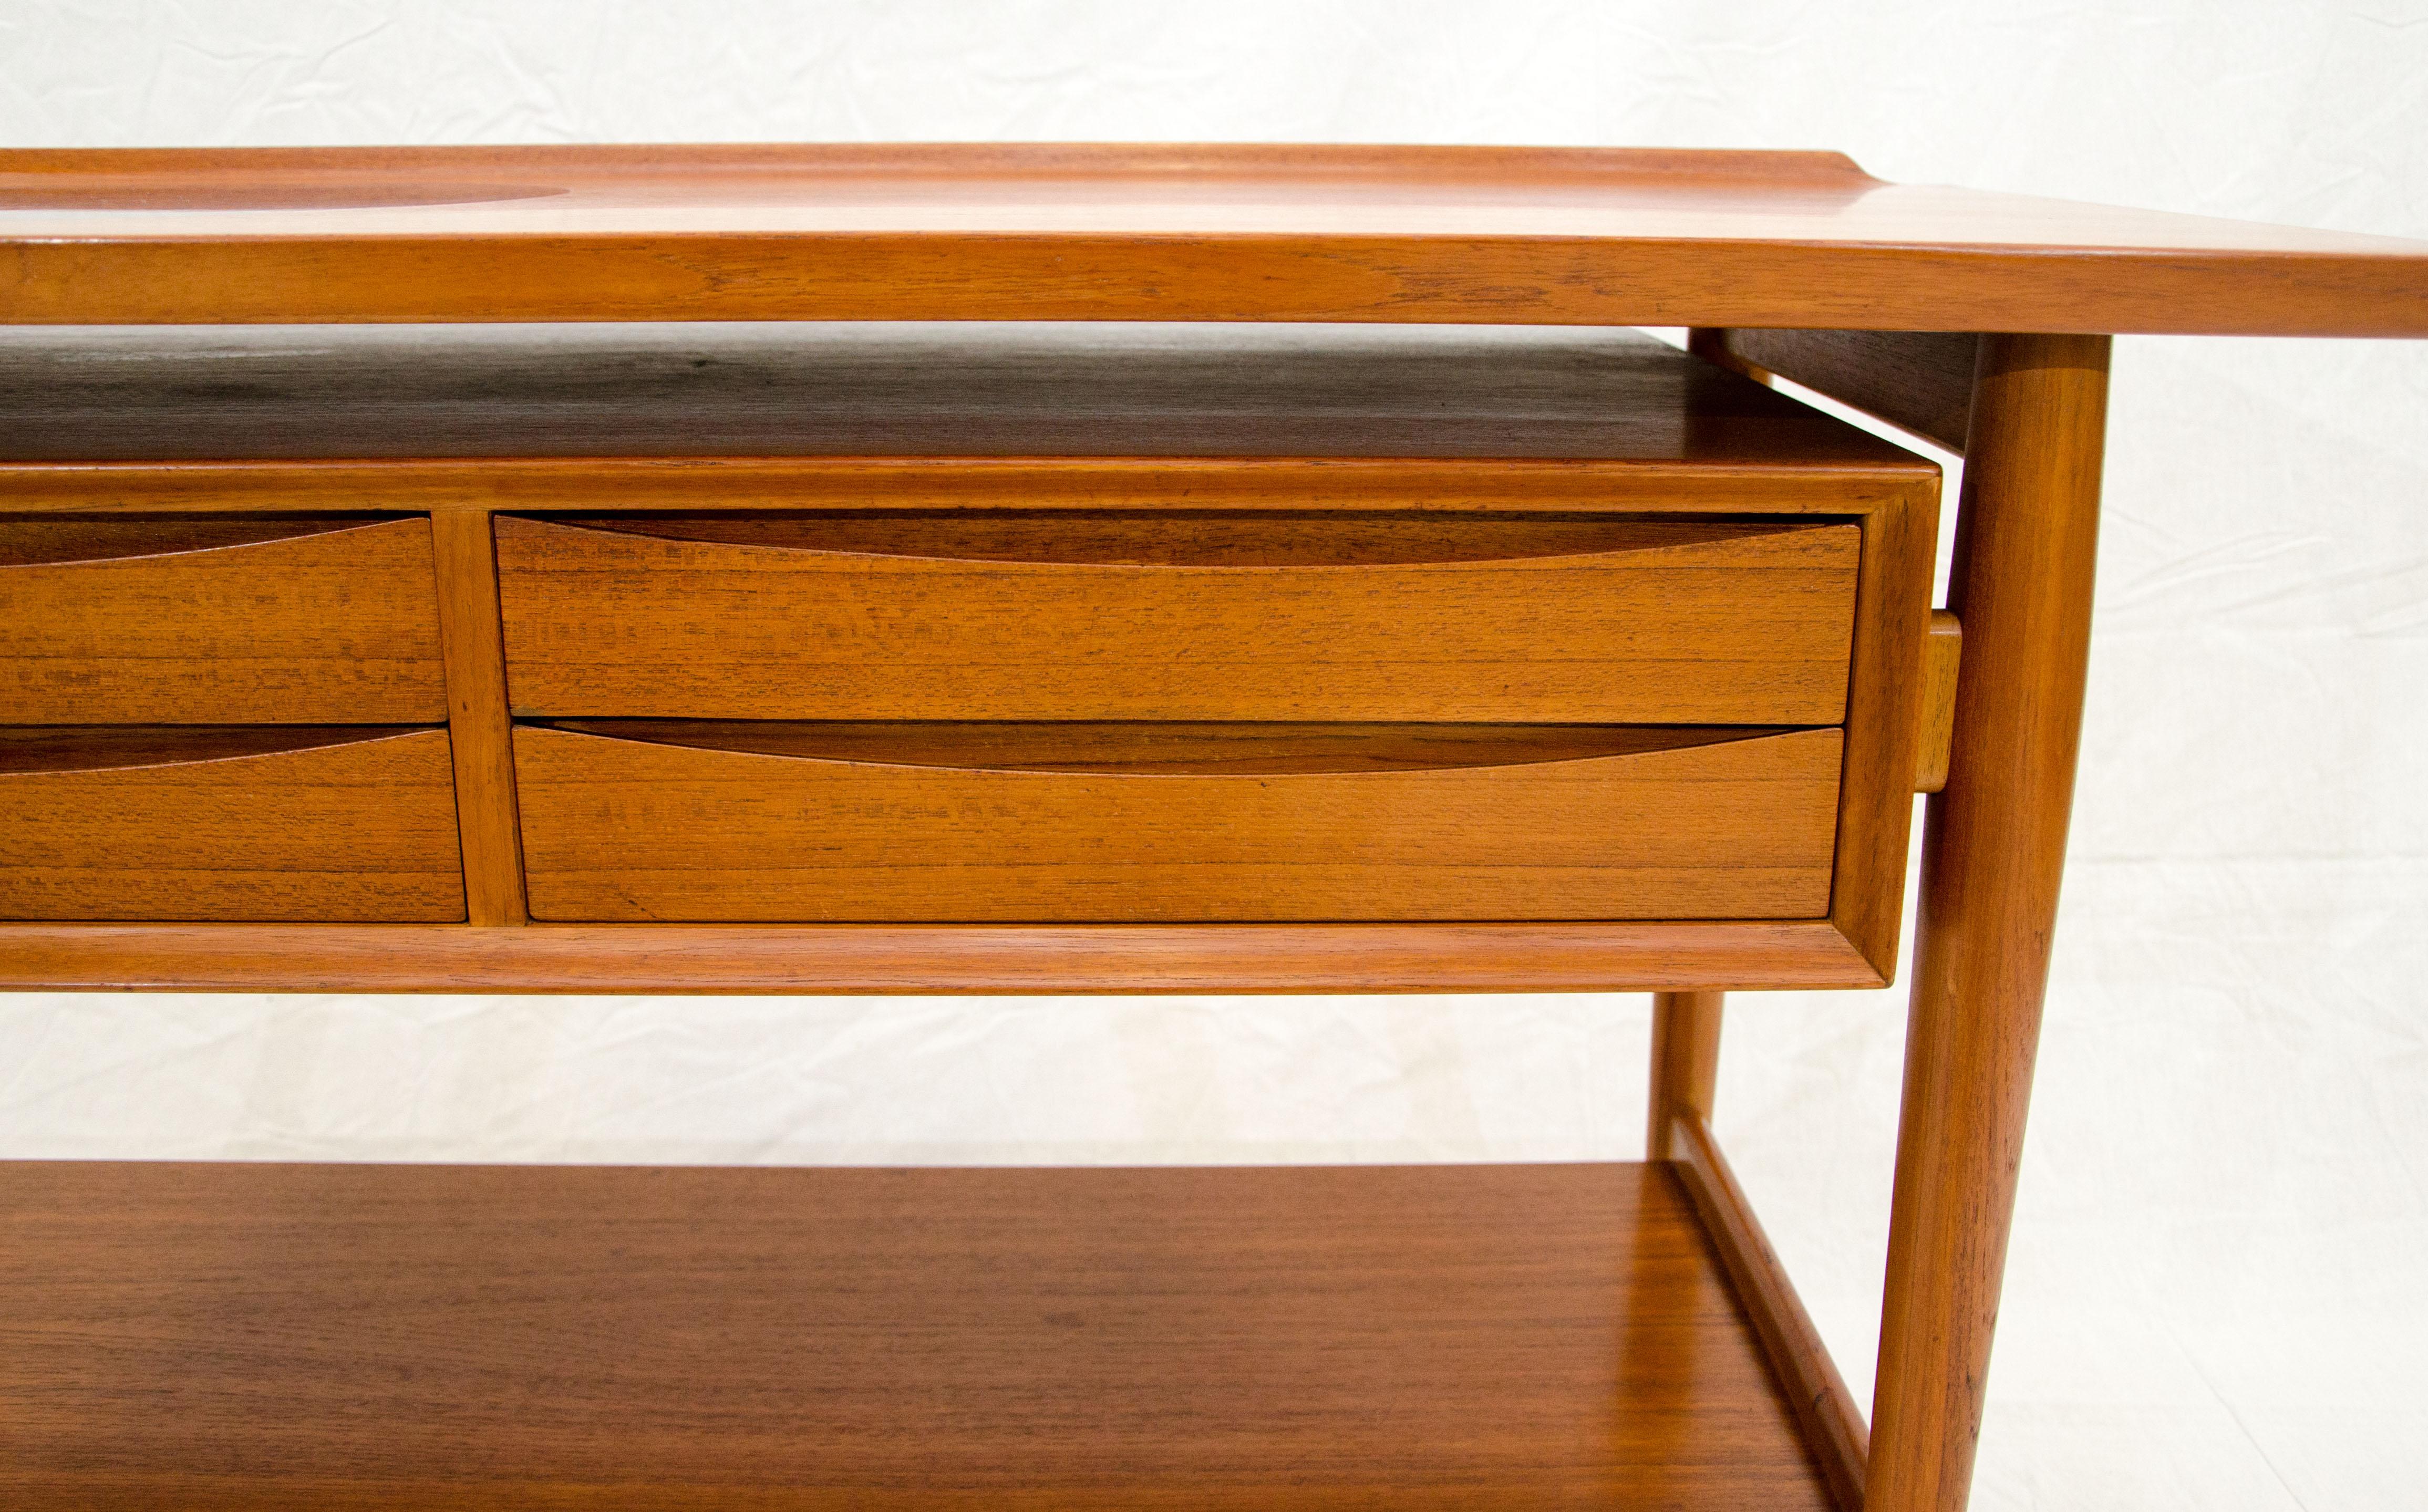 Unusual Danish Teak Buffet or Console Table by Arne Vodder for Sibast Furniture 6